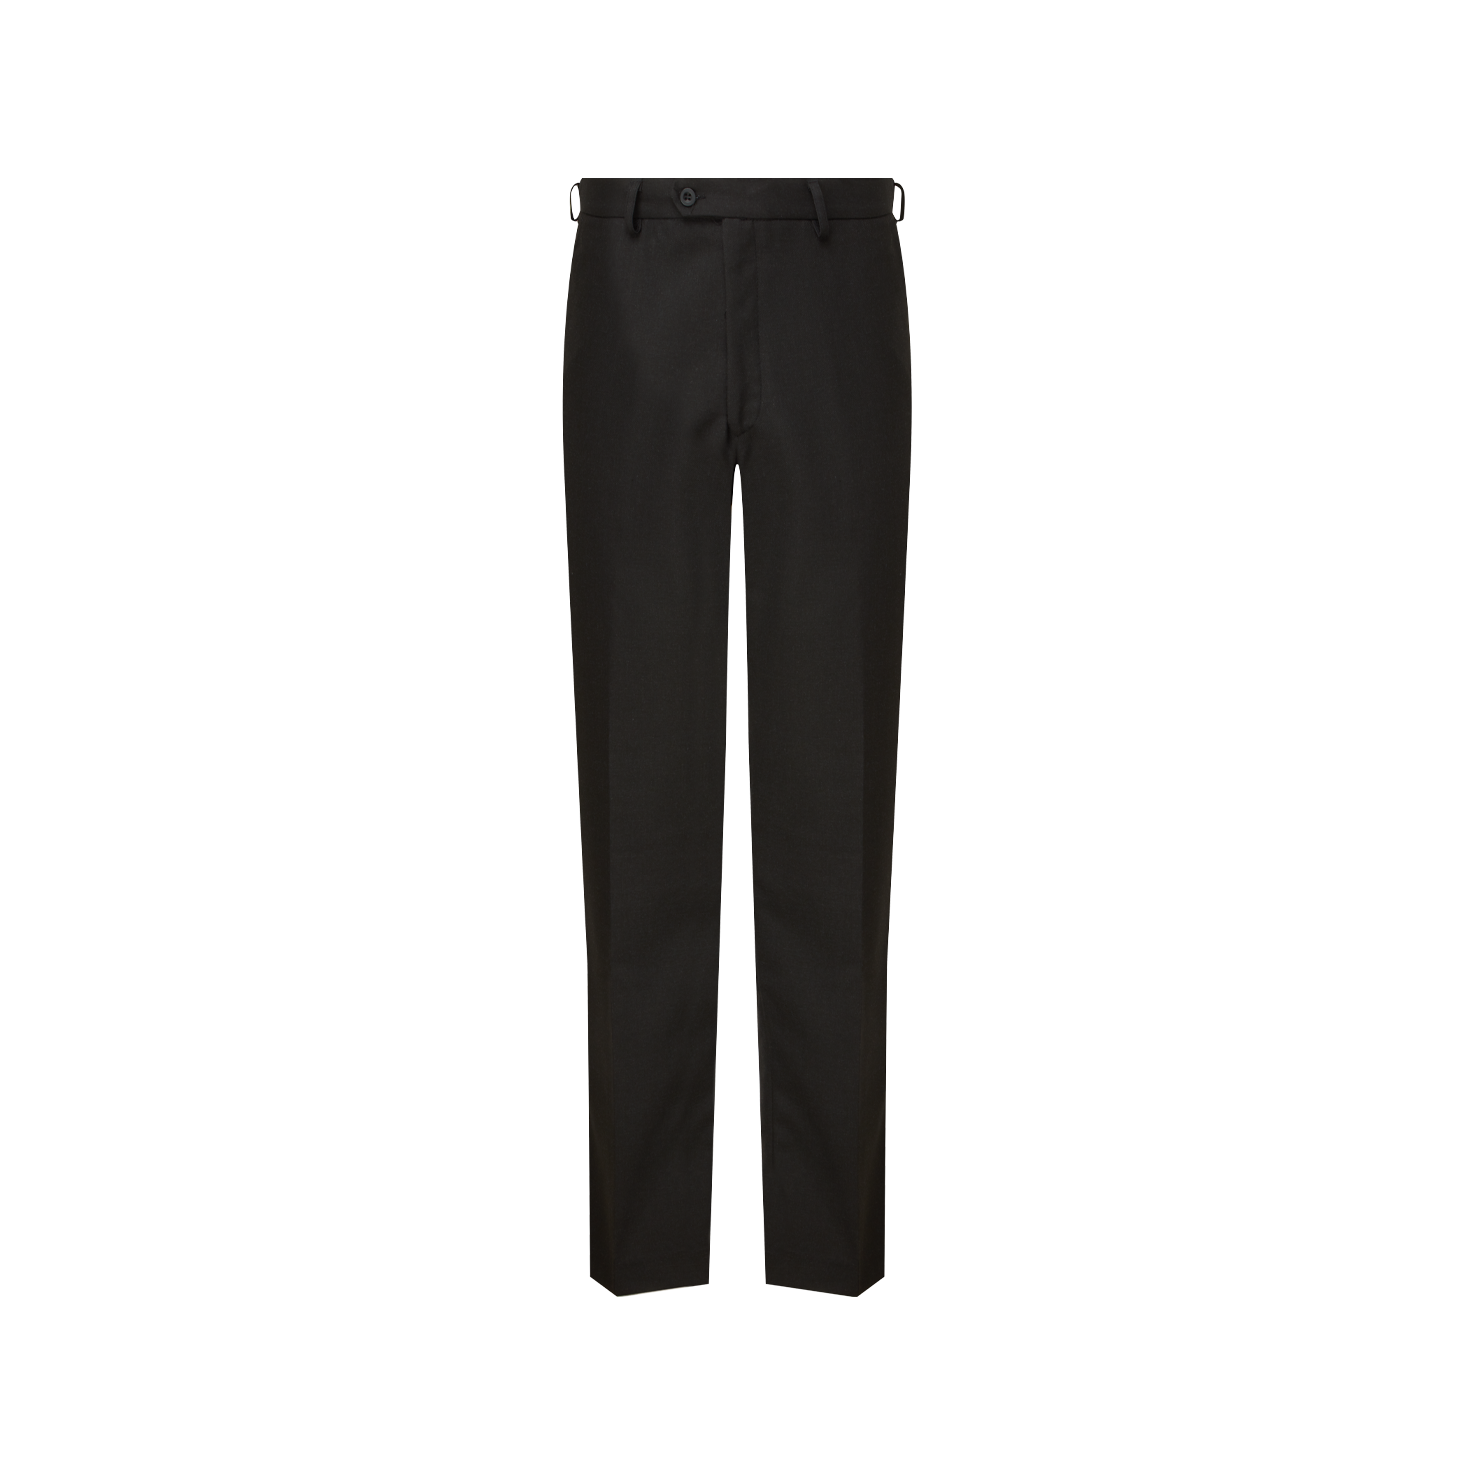 John Lewis ANYDAY The Basics Adjustable Waist Boys School Trousers Pack  of 2 Charcoal at John Lewis  Partners